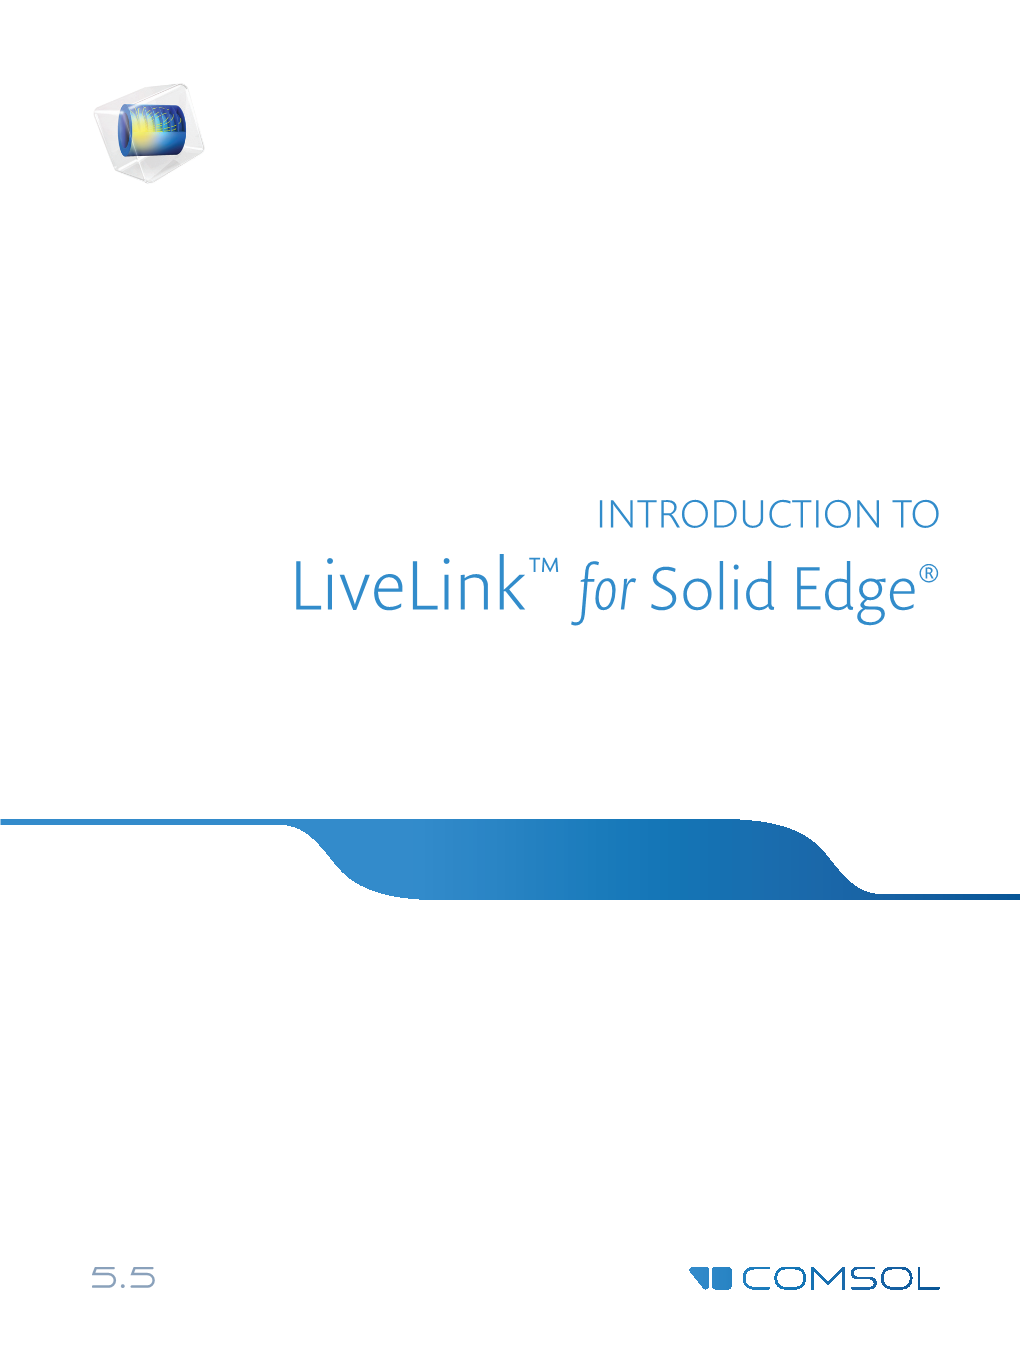 Introduction to Livelink for Solid Edge